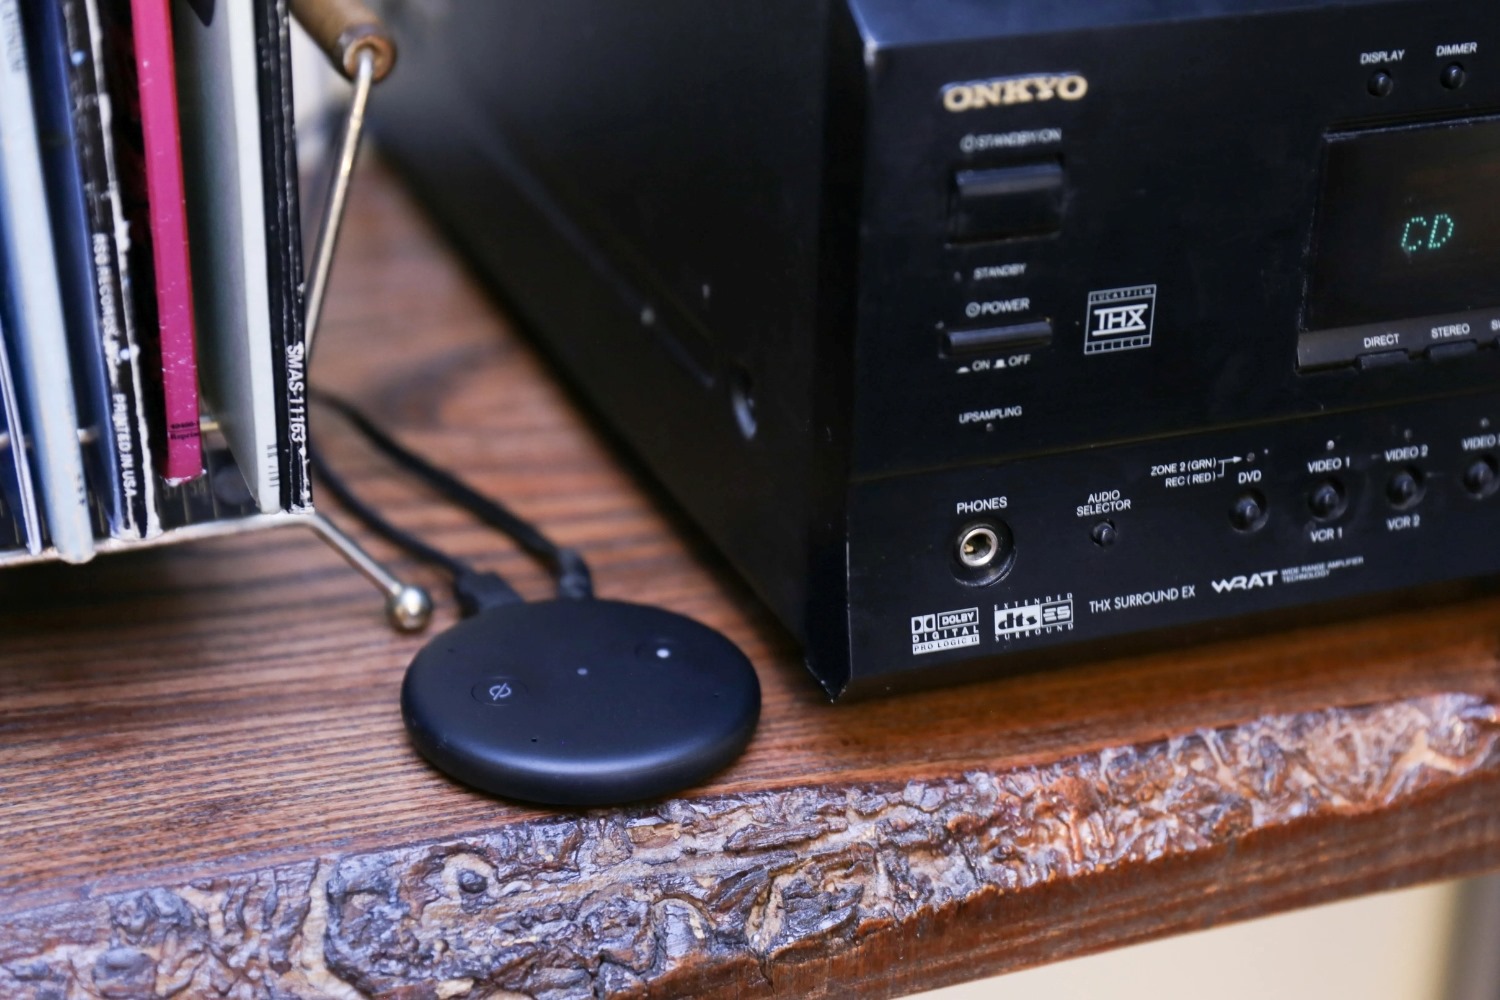 How To Connect Amazon Echo To Stereo Receiver